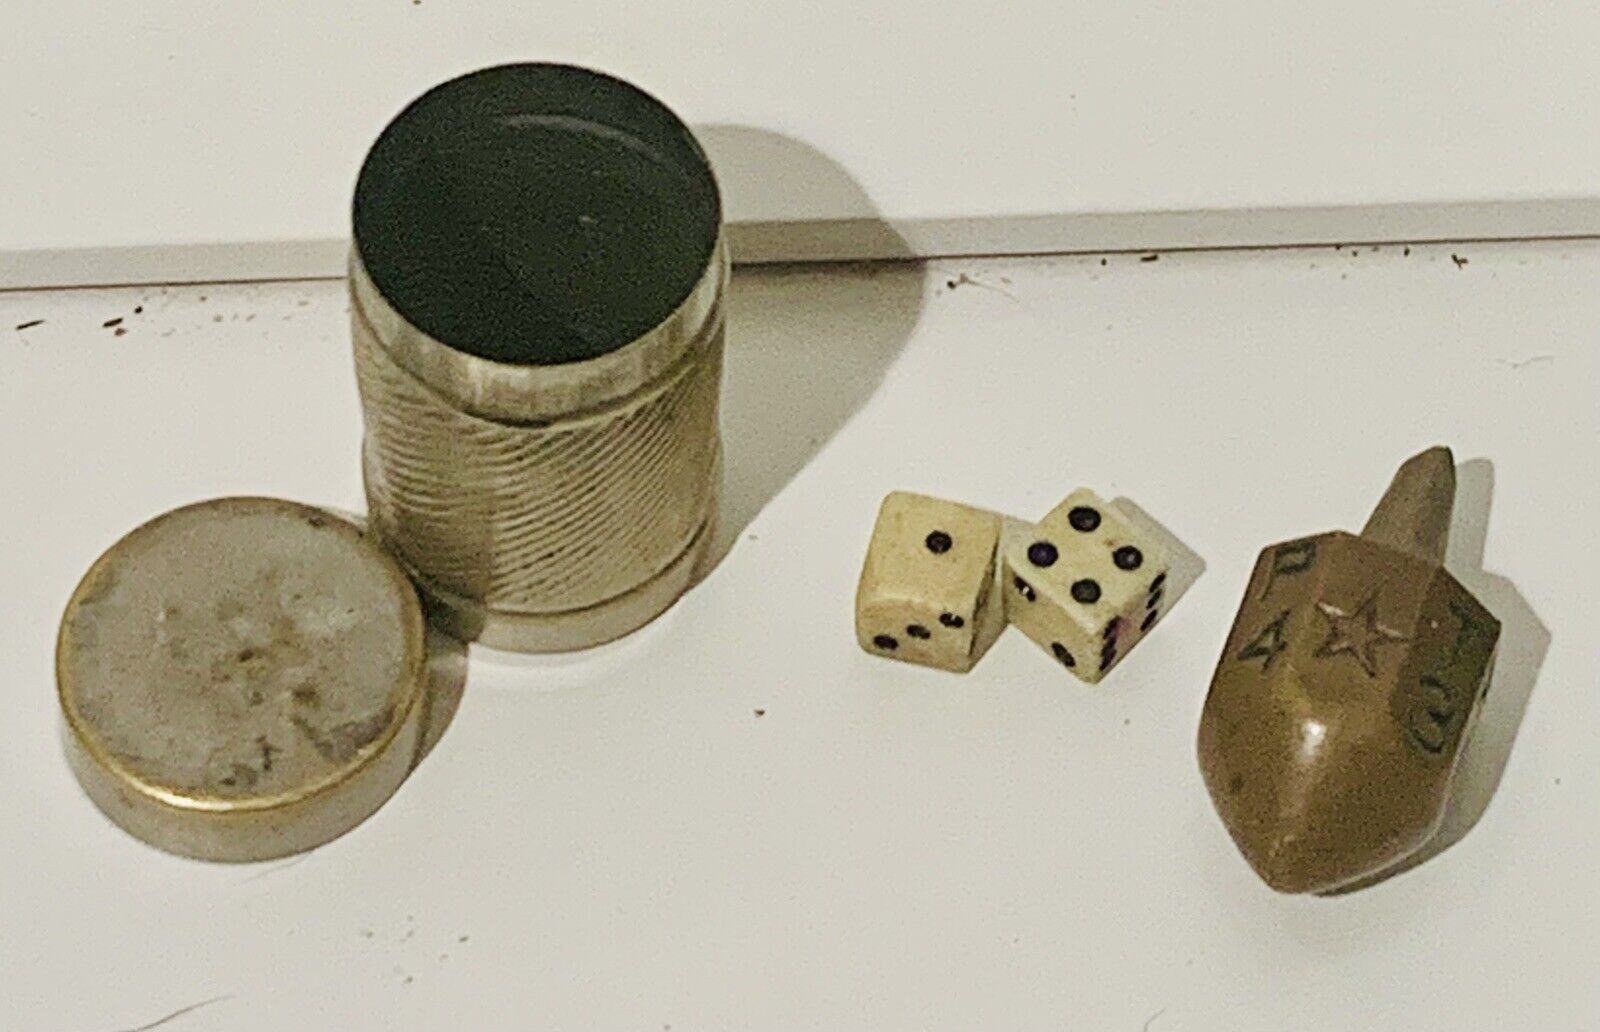 Antique WW1 Pocket Put/Take Game, Spinning Top, Two Tiny Dice, Tiny Canister